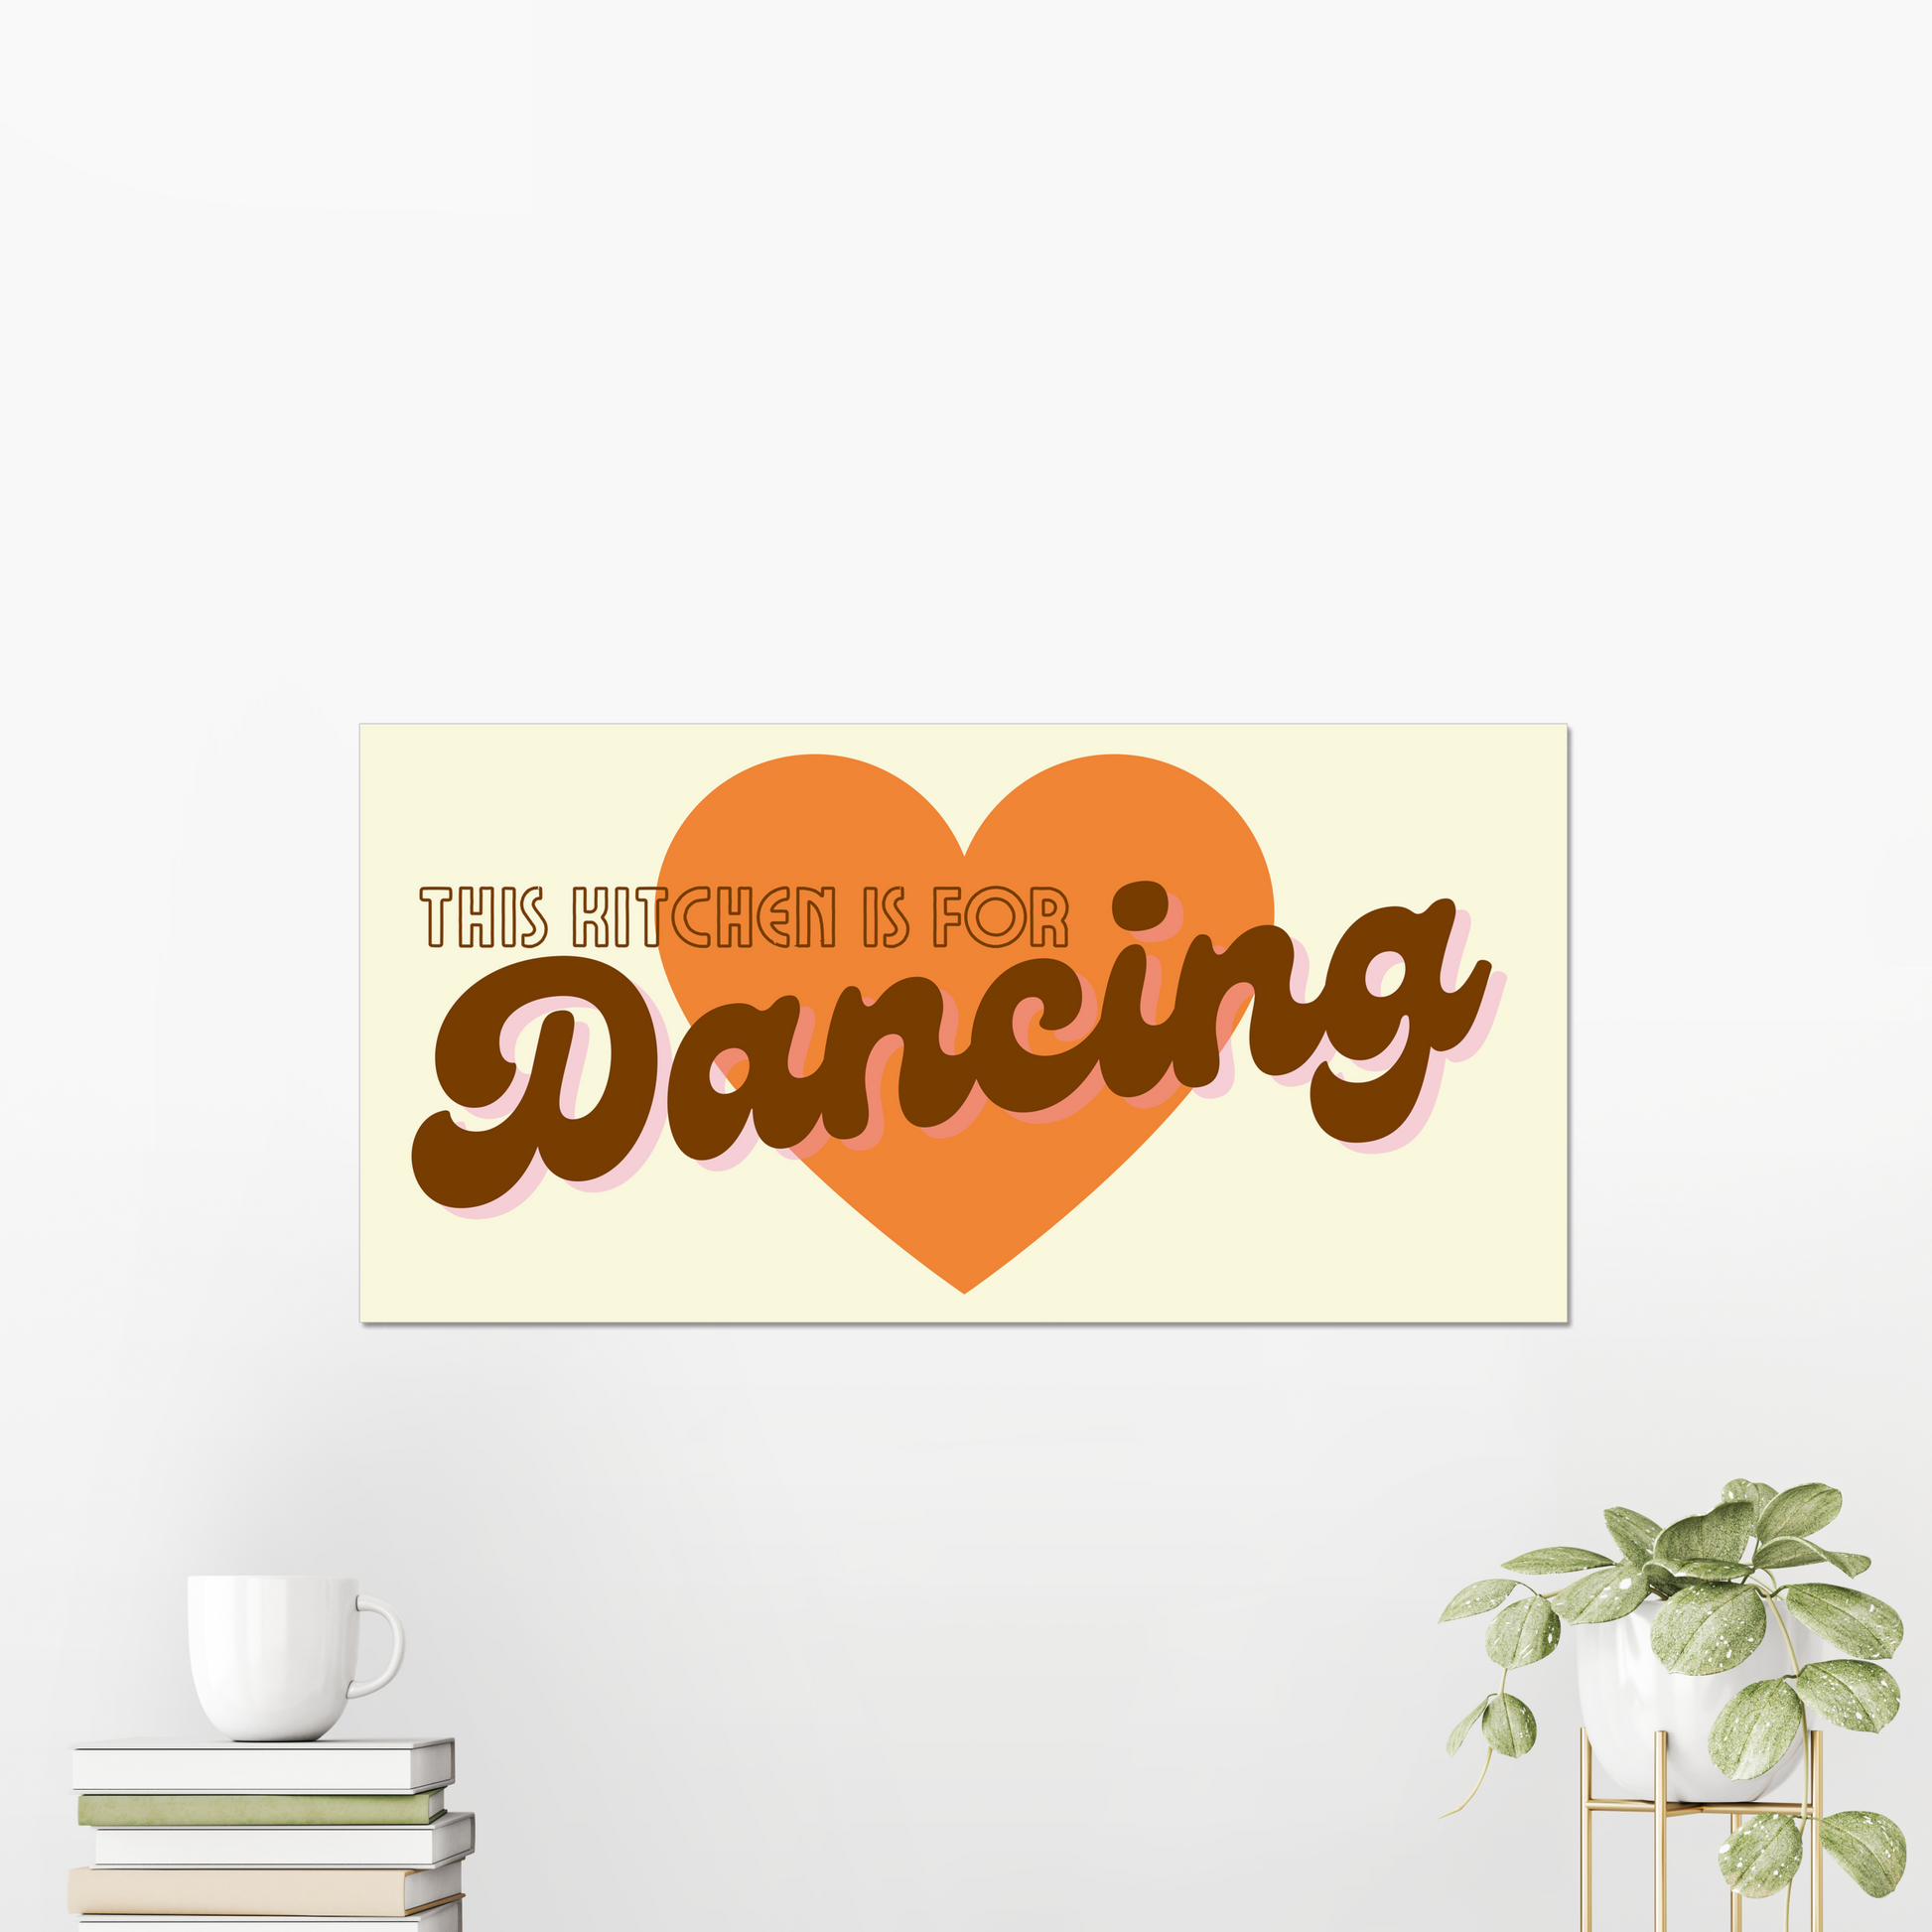 This Kitchen Is For Dancing is the perfect addition to any kitchen with a sense of fun and quirkiness. The catchy phrase and retro mustard yellow and brown style make it a truly unique art print that is sure to bring a smile to your face every time you see it.